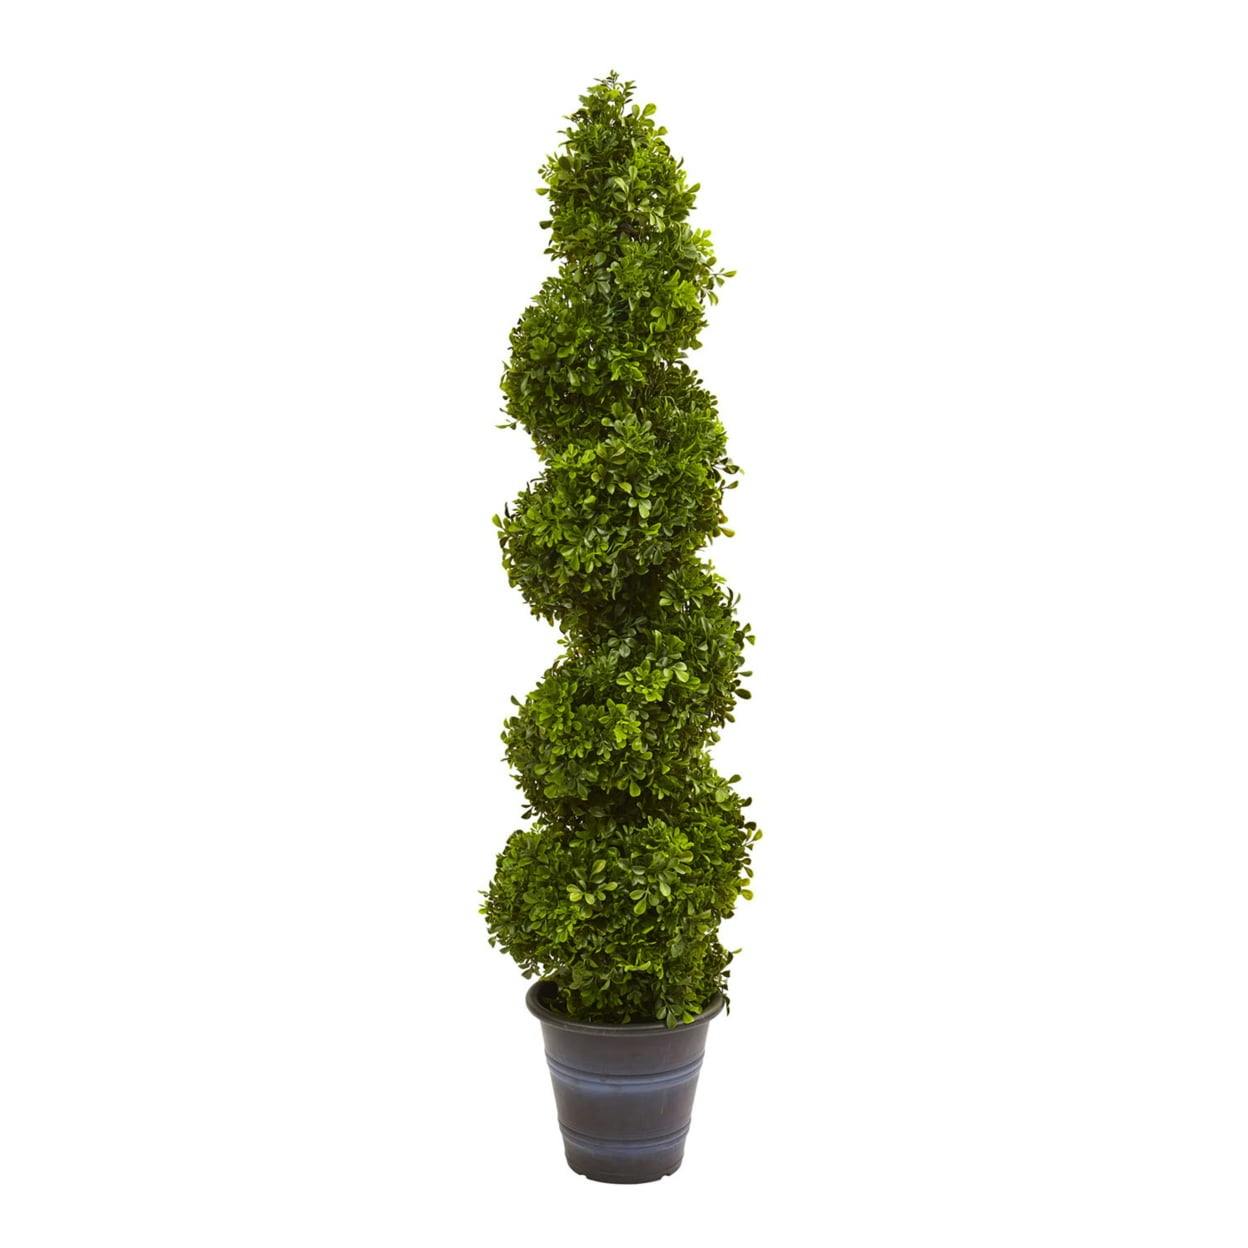 Elegant Spiral Boxwood Topiary in Planter, 4ft Outdoor Classic